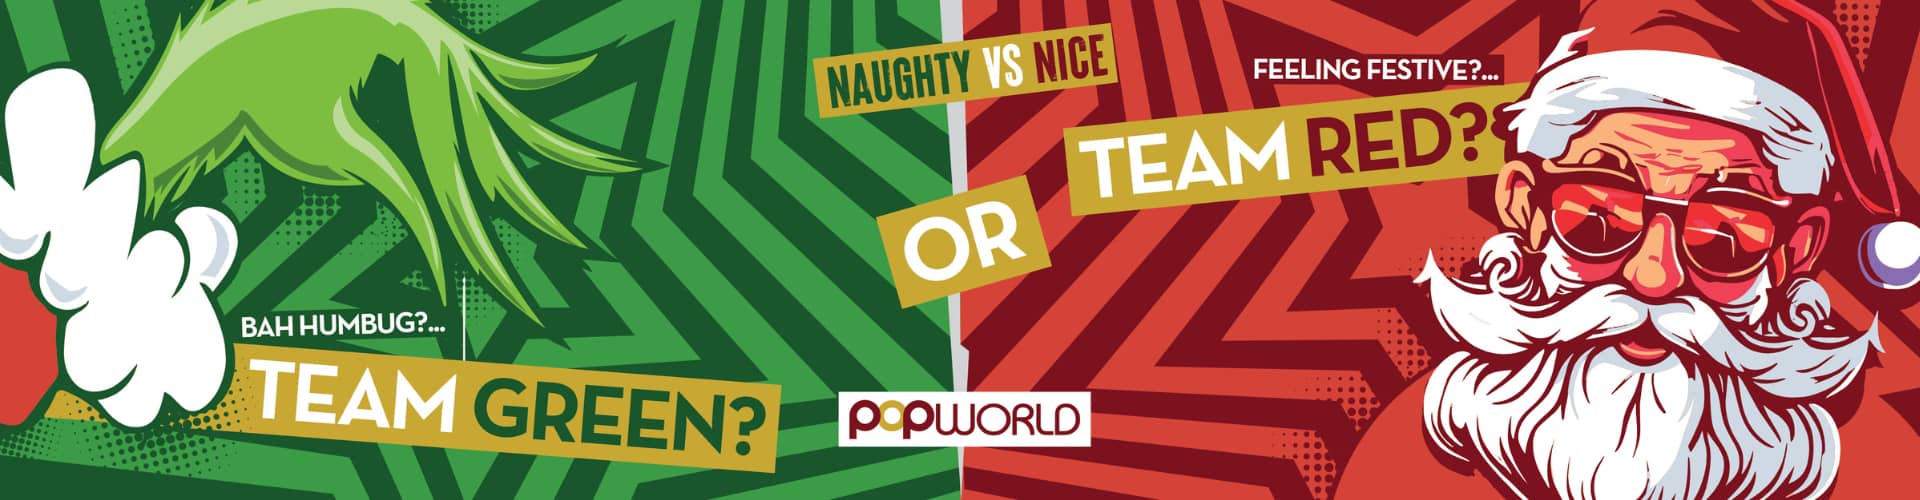 Popworld Newcastle - Naughty vs Nice - Are you Team Green or Team Red?